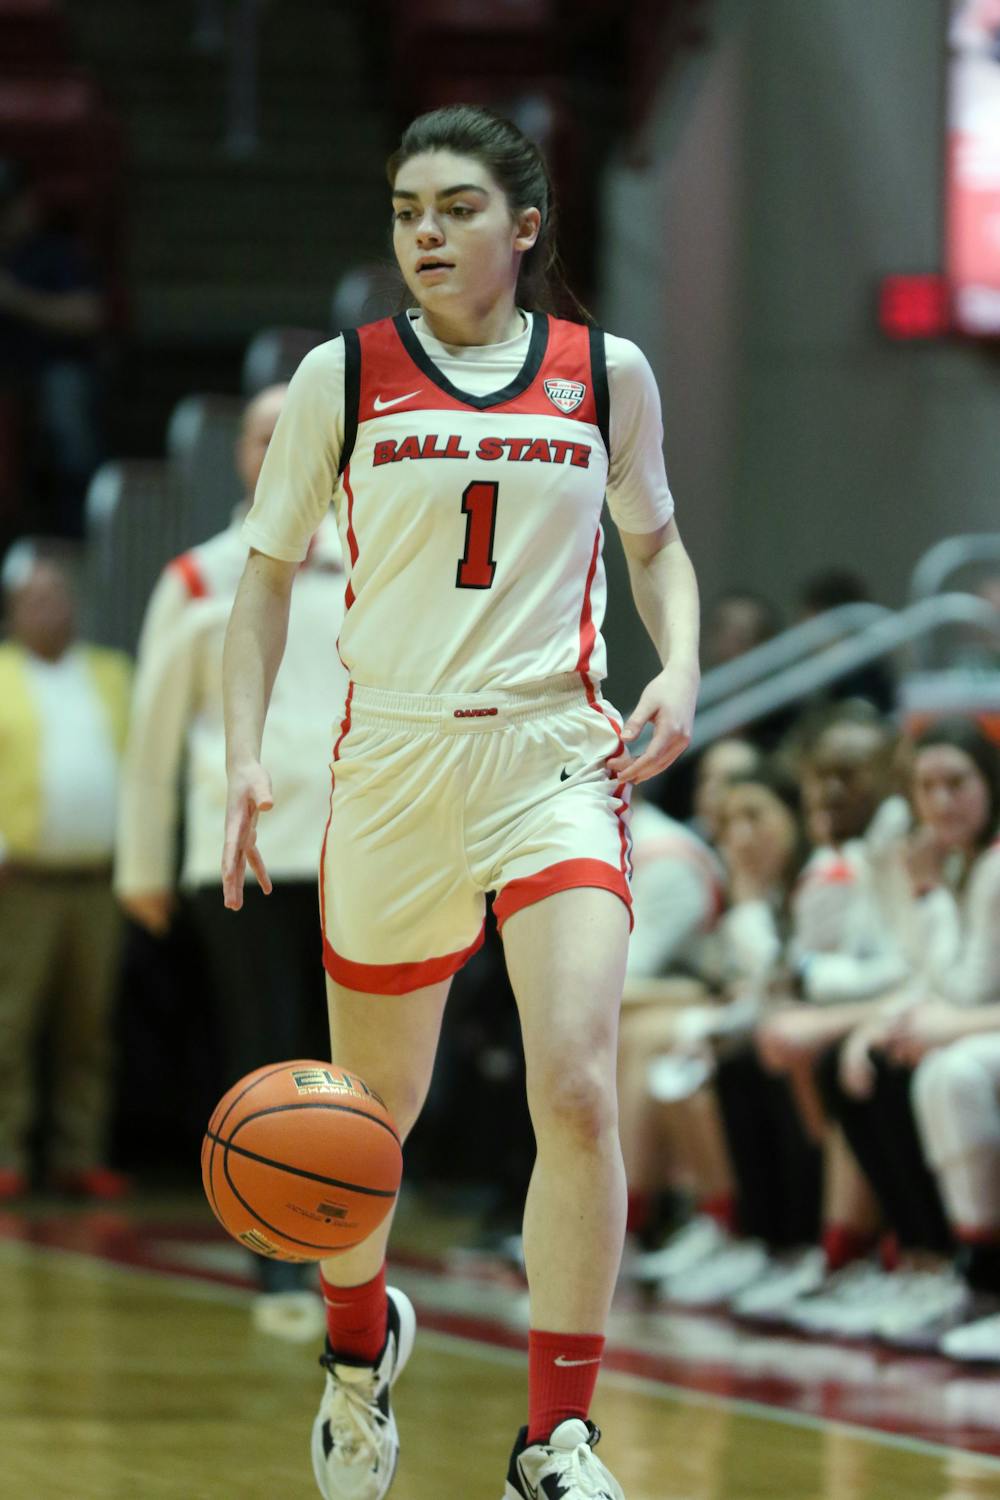 Freshman Hana Muhl bring the ball up the court in a game against Northern Illinois Feb. 1 at Worthen Arena. Muhl tallied one assist in the win. Brayden Goins, DN